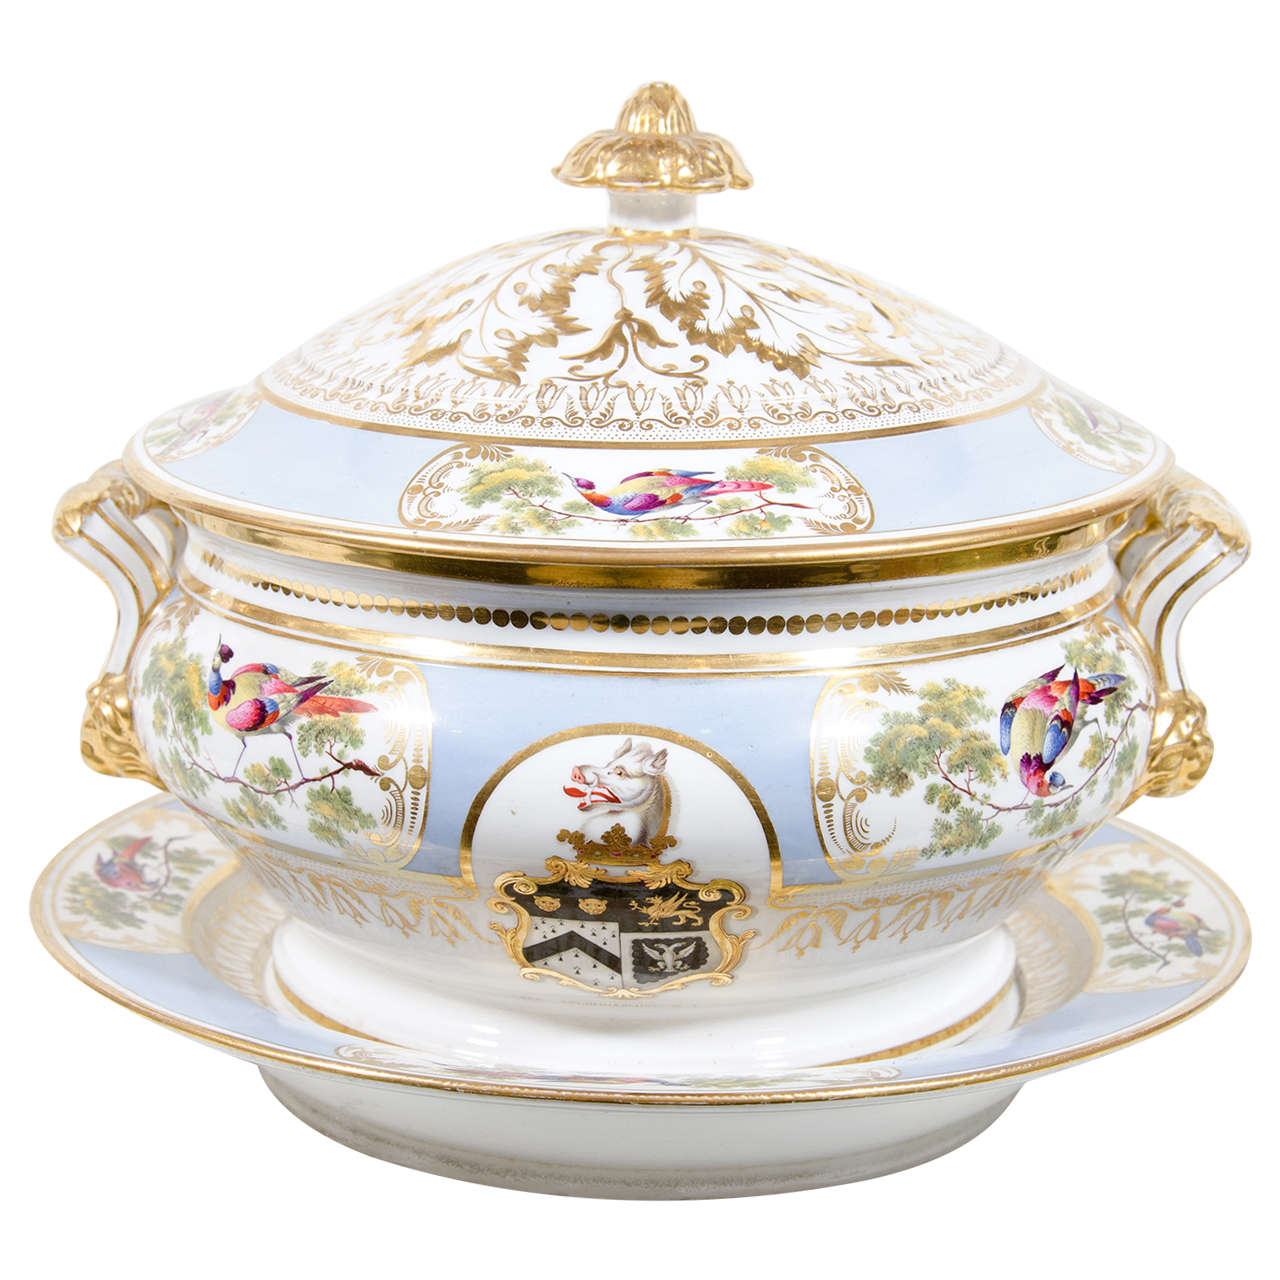 Chamberlain's Worcester Tureen with Armorial of Prescott Family